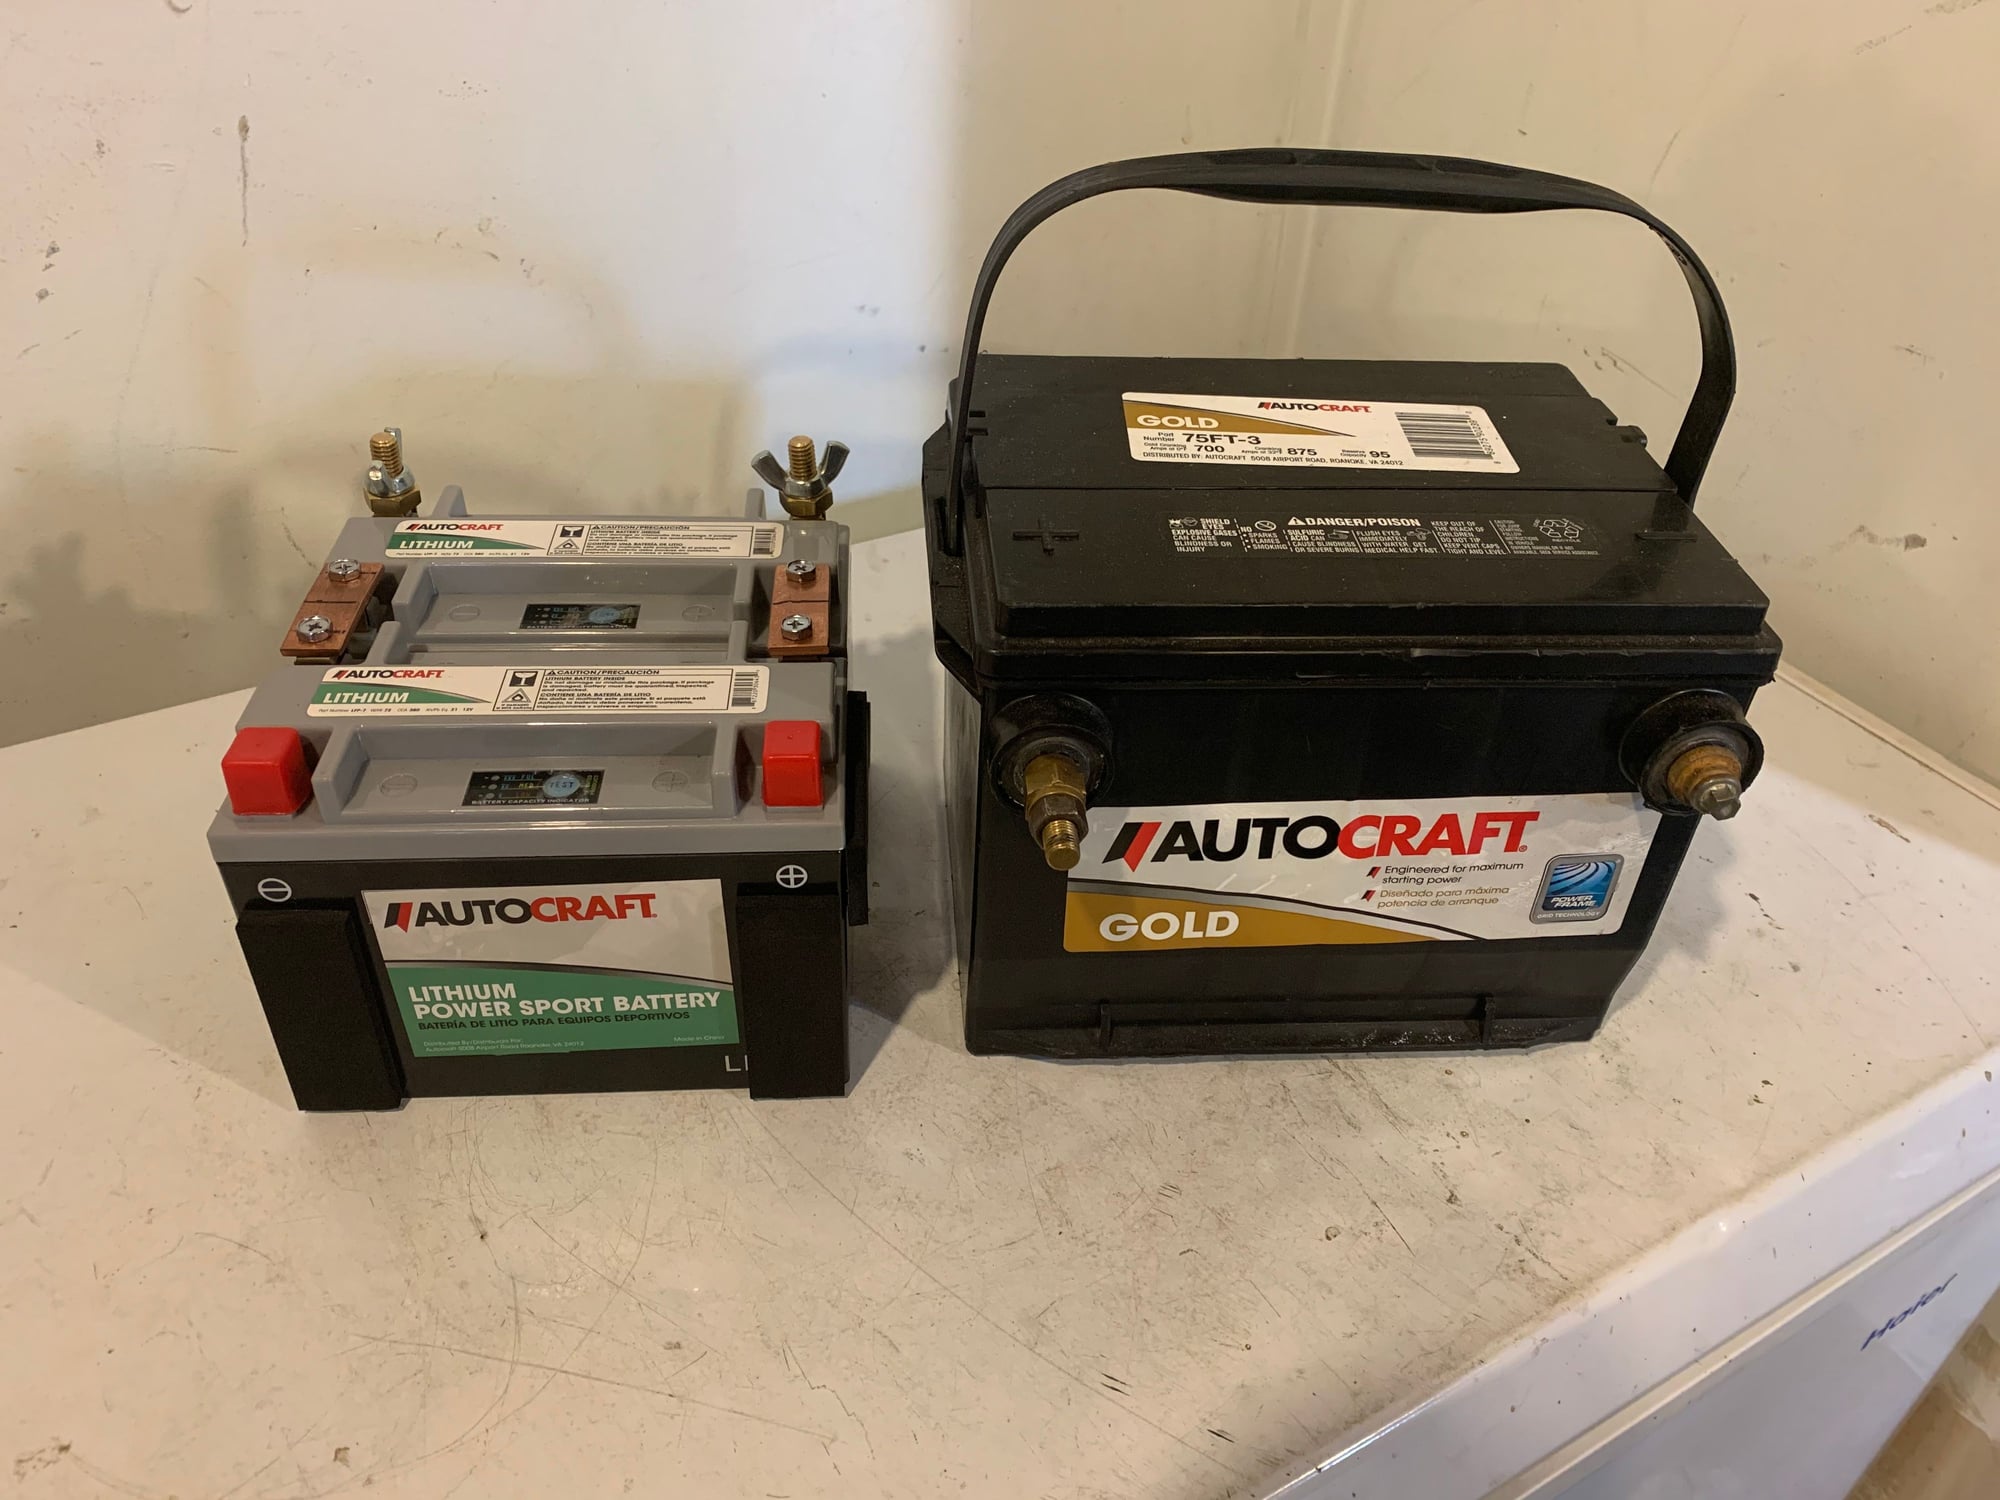 Dual Lithium power sport batteries in trunk for Turbo 5.3